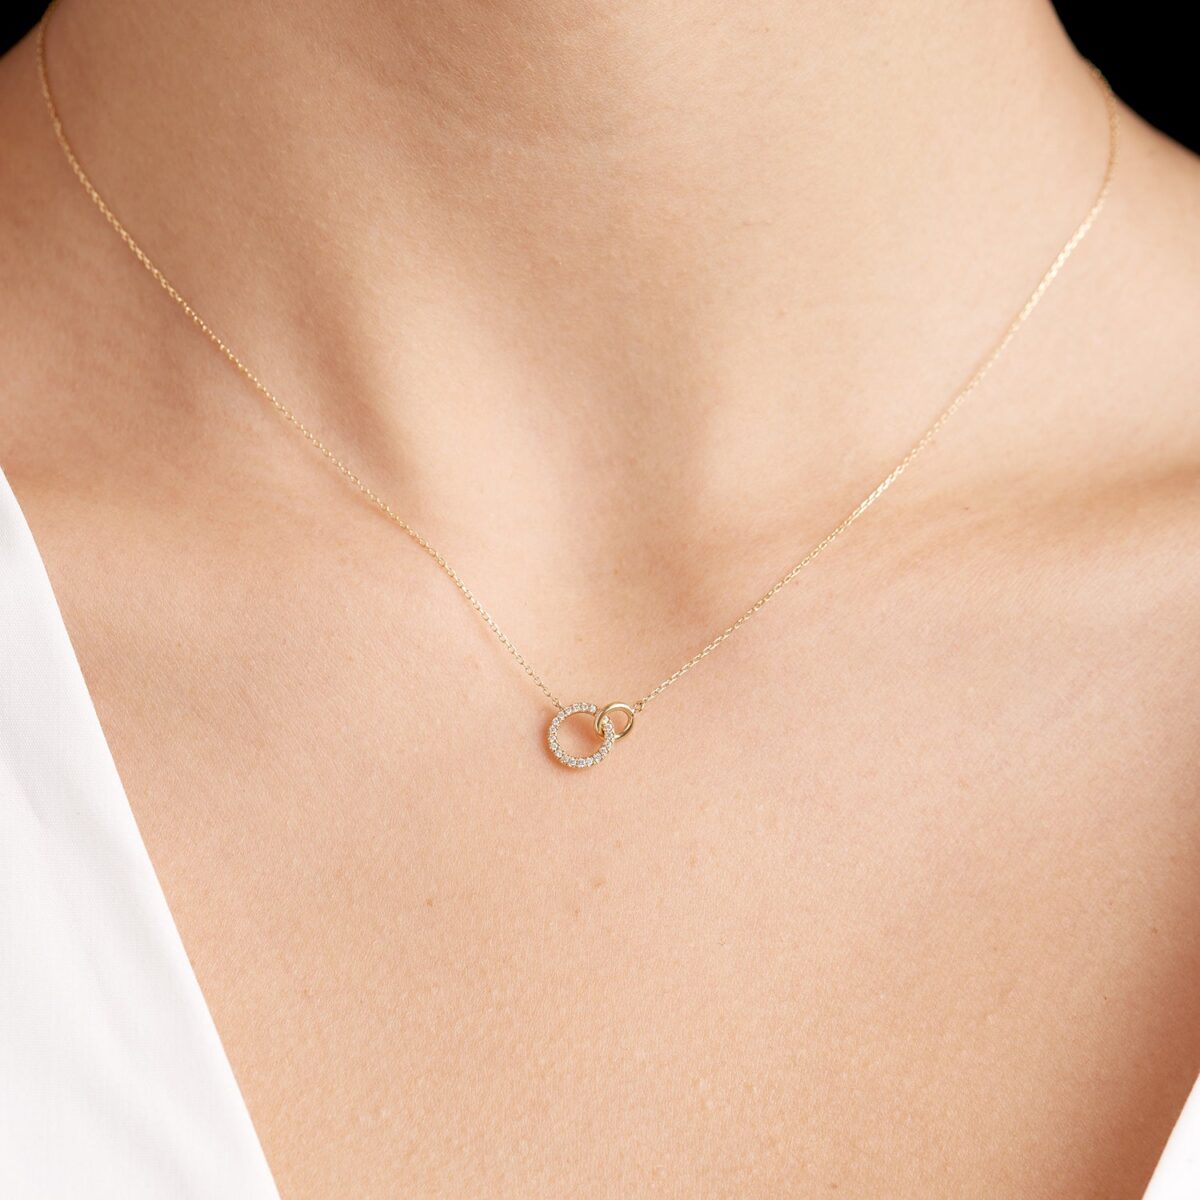 Round circle lab grown diamond pendant crafted in solid 14k yellow gold